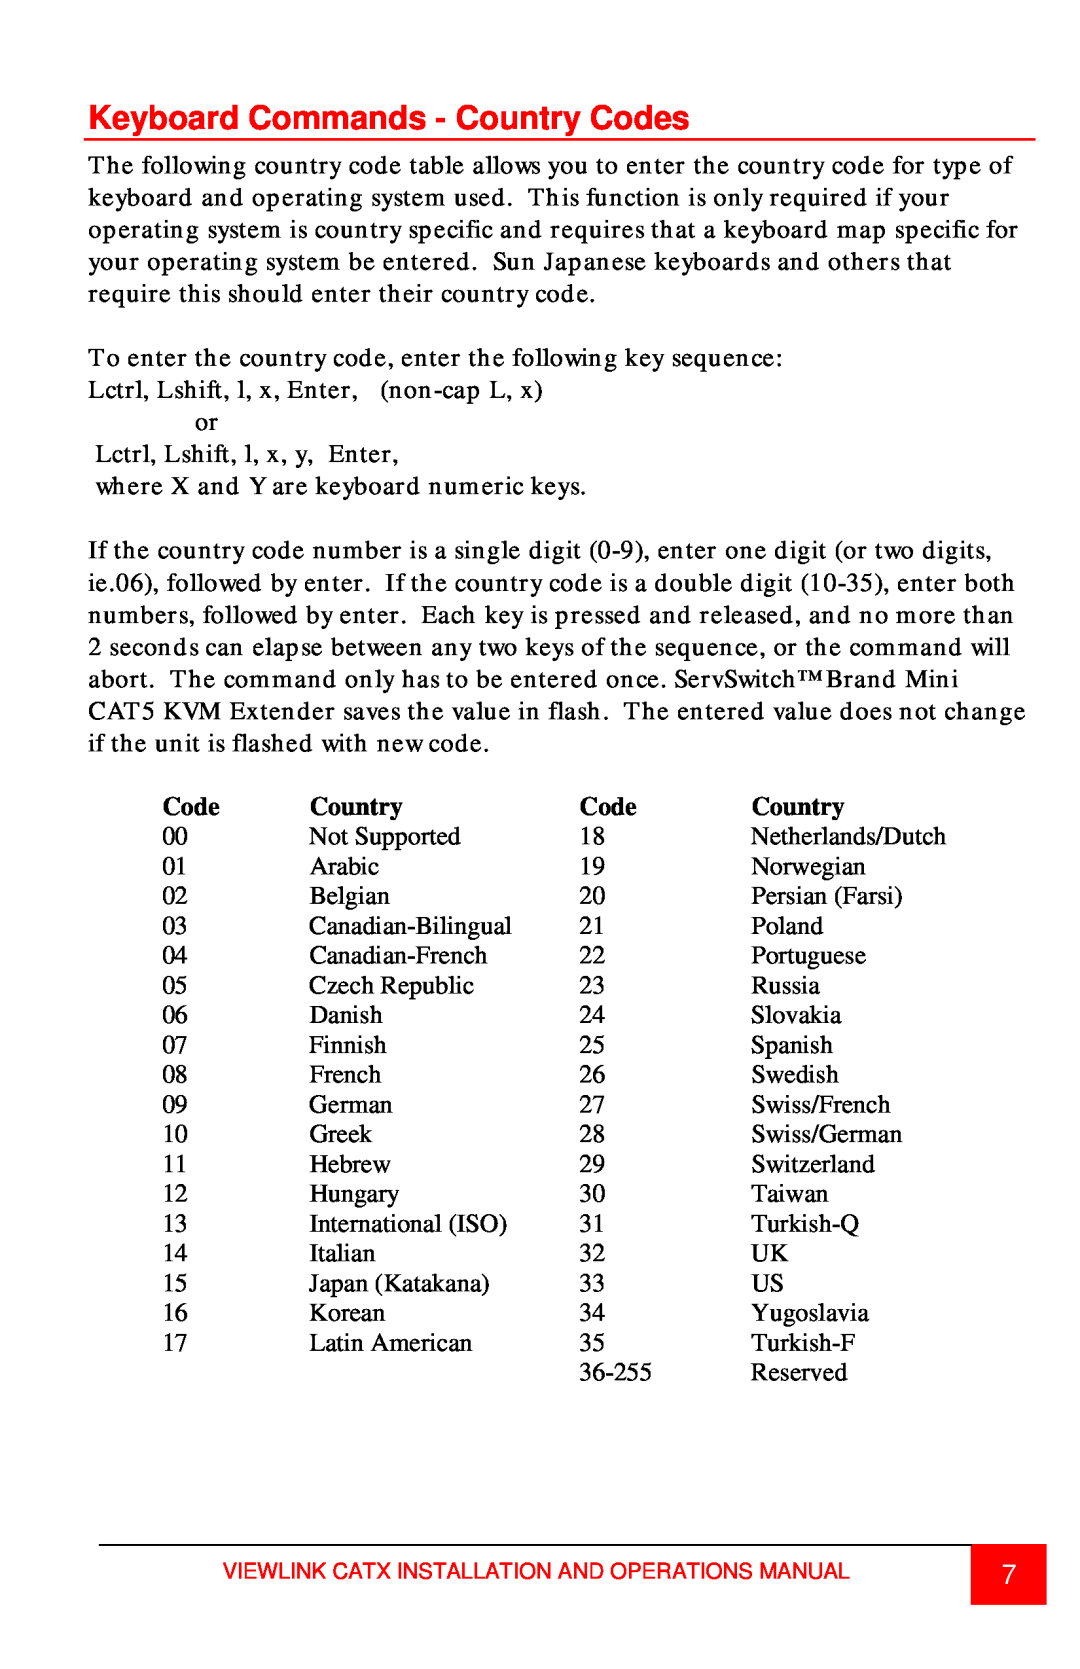 Rose electronic CATx manual Keyboard Commands - Country Codes 